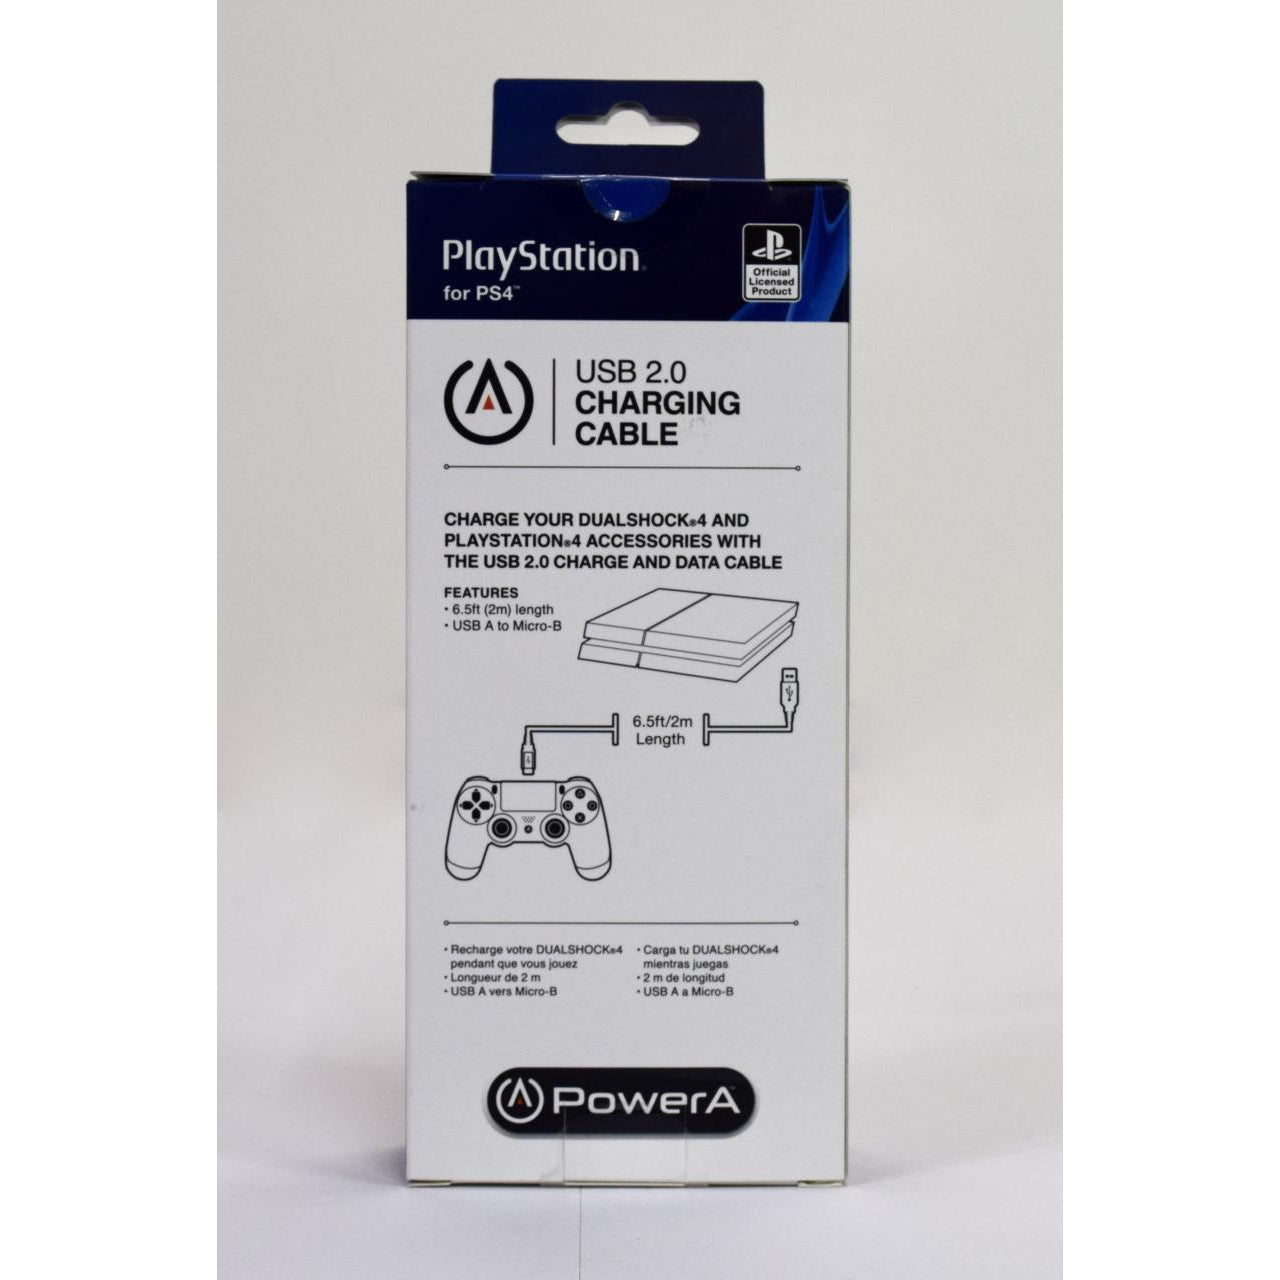 PowerA USB 2.0 Charging Cable for PlayStation 4